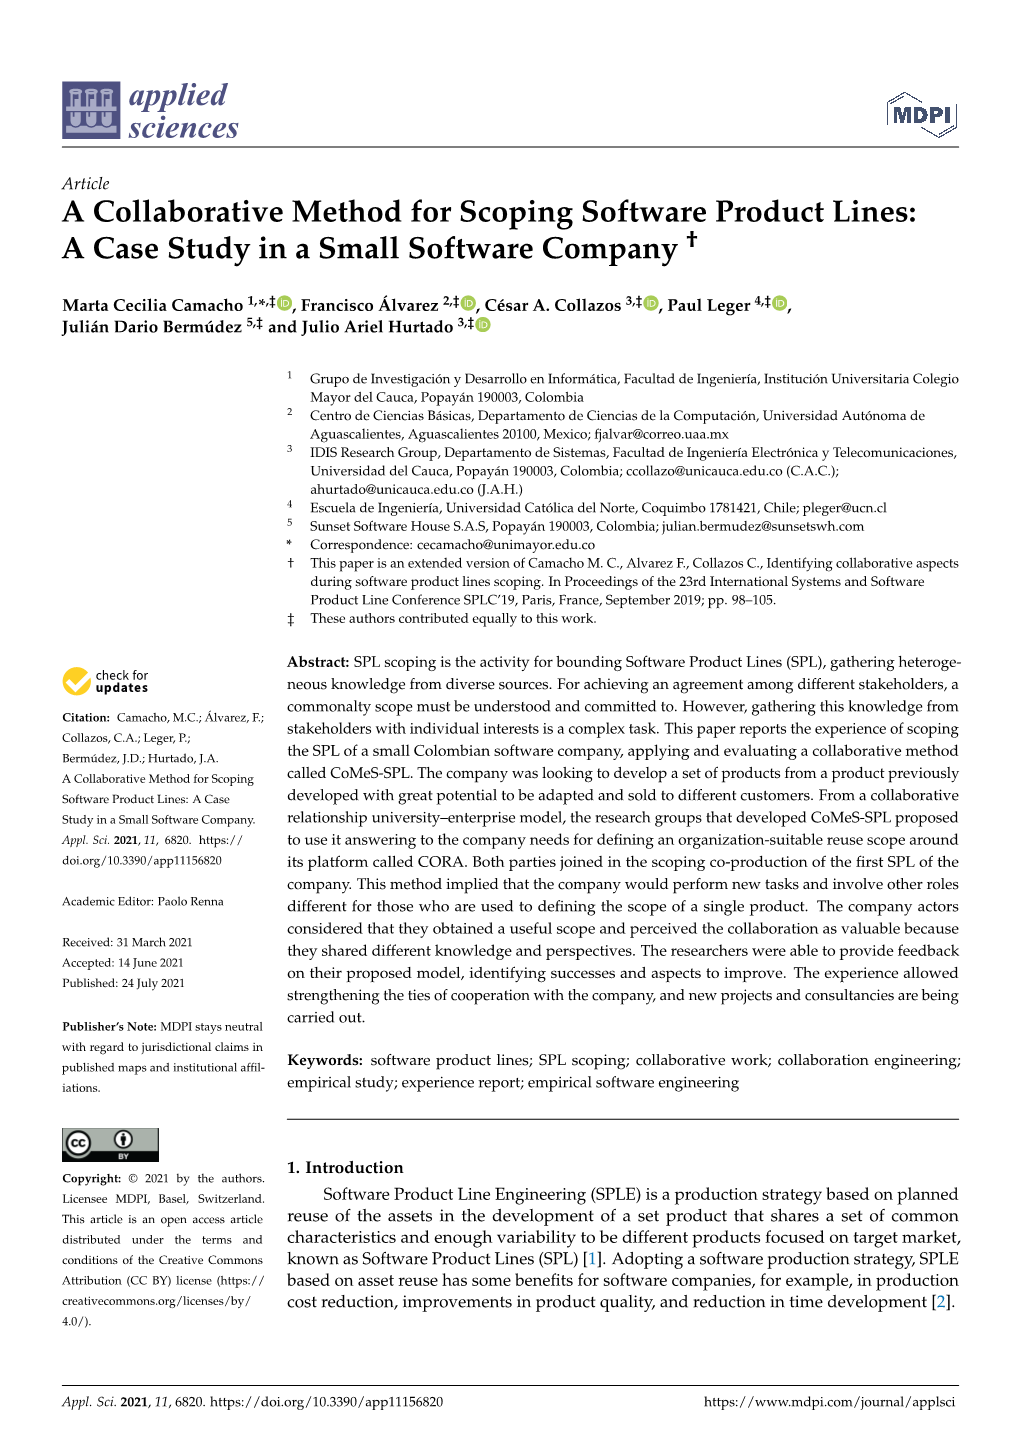 A Collaborative Method for Scoping Software Product Lines: a Case Study in a Small Software Company †